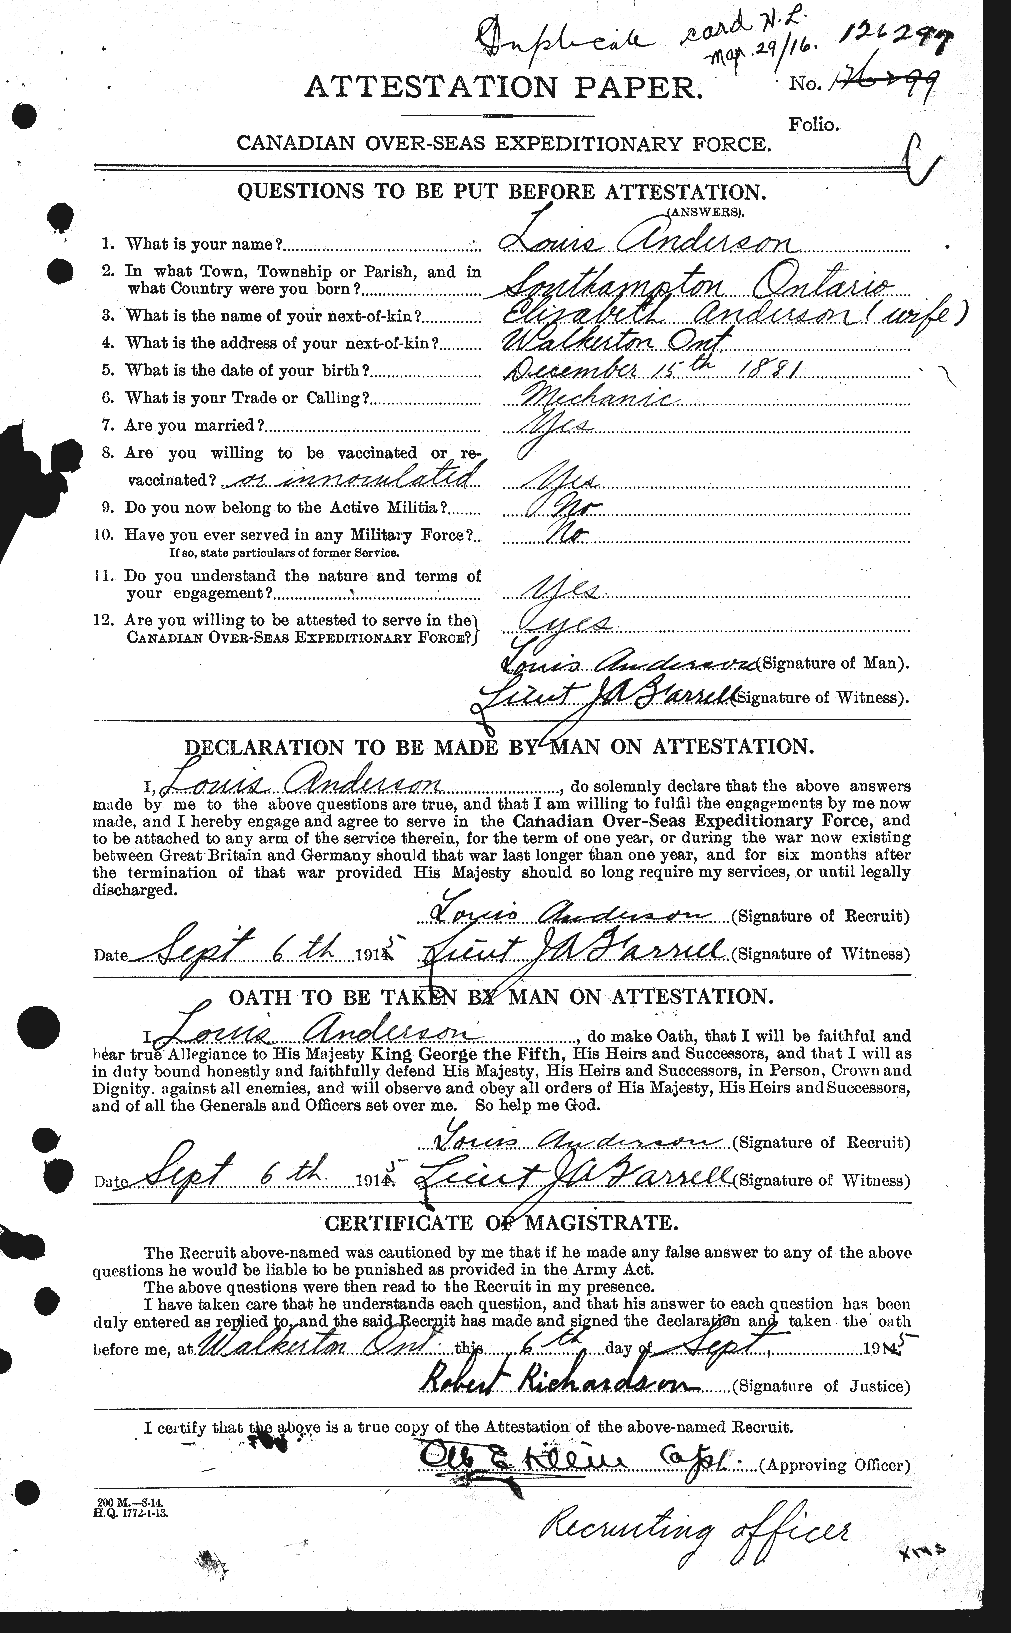 Personnel Records of the First World War - CEF 207506a